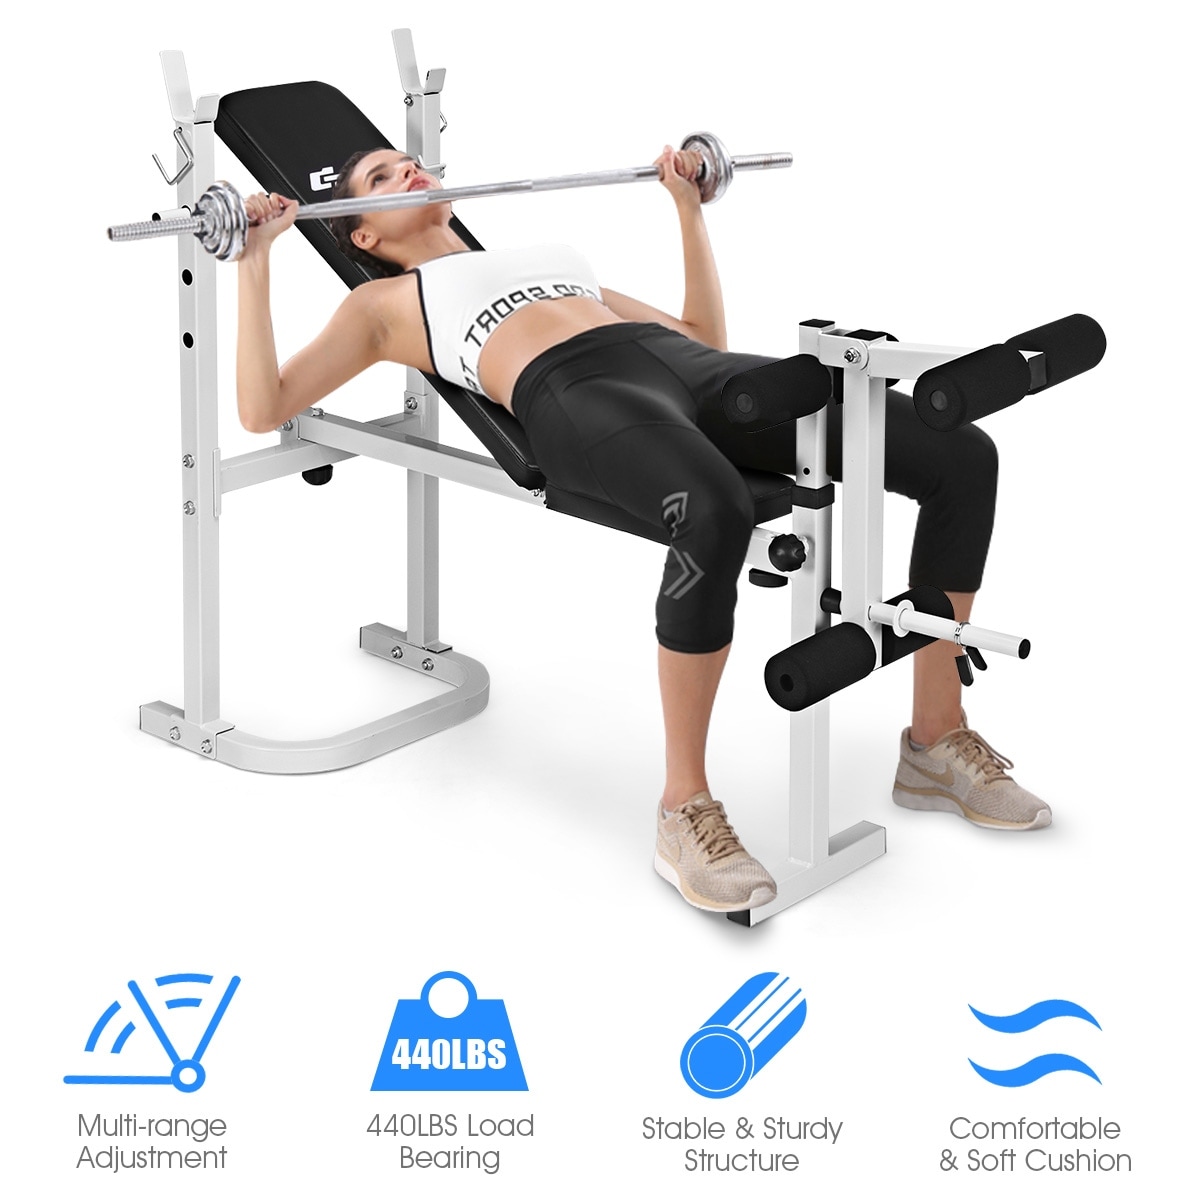 Details about   Adjustable Weight Bench Press Folding Detachable Leg Lock-Down Home Gym Exercise 